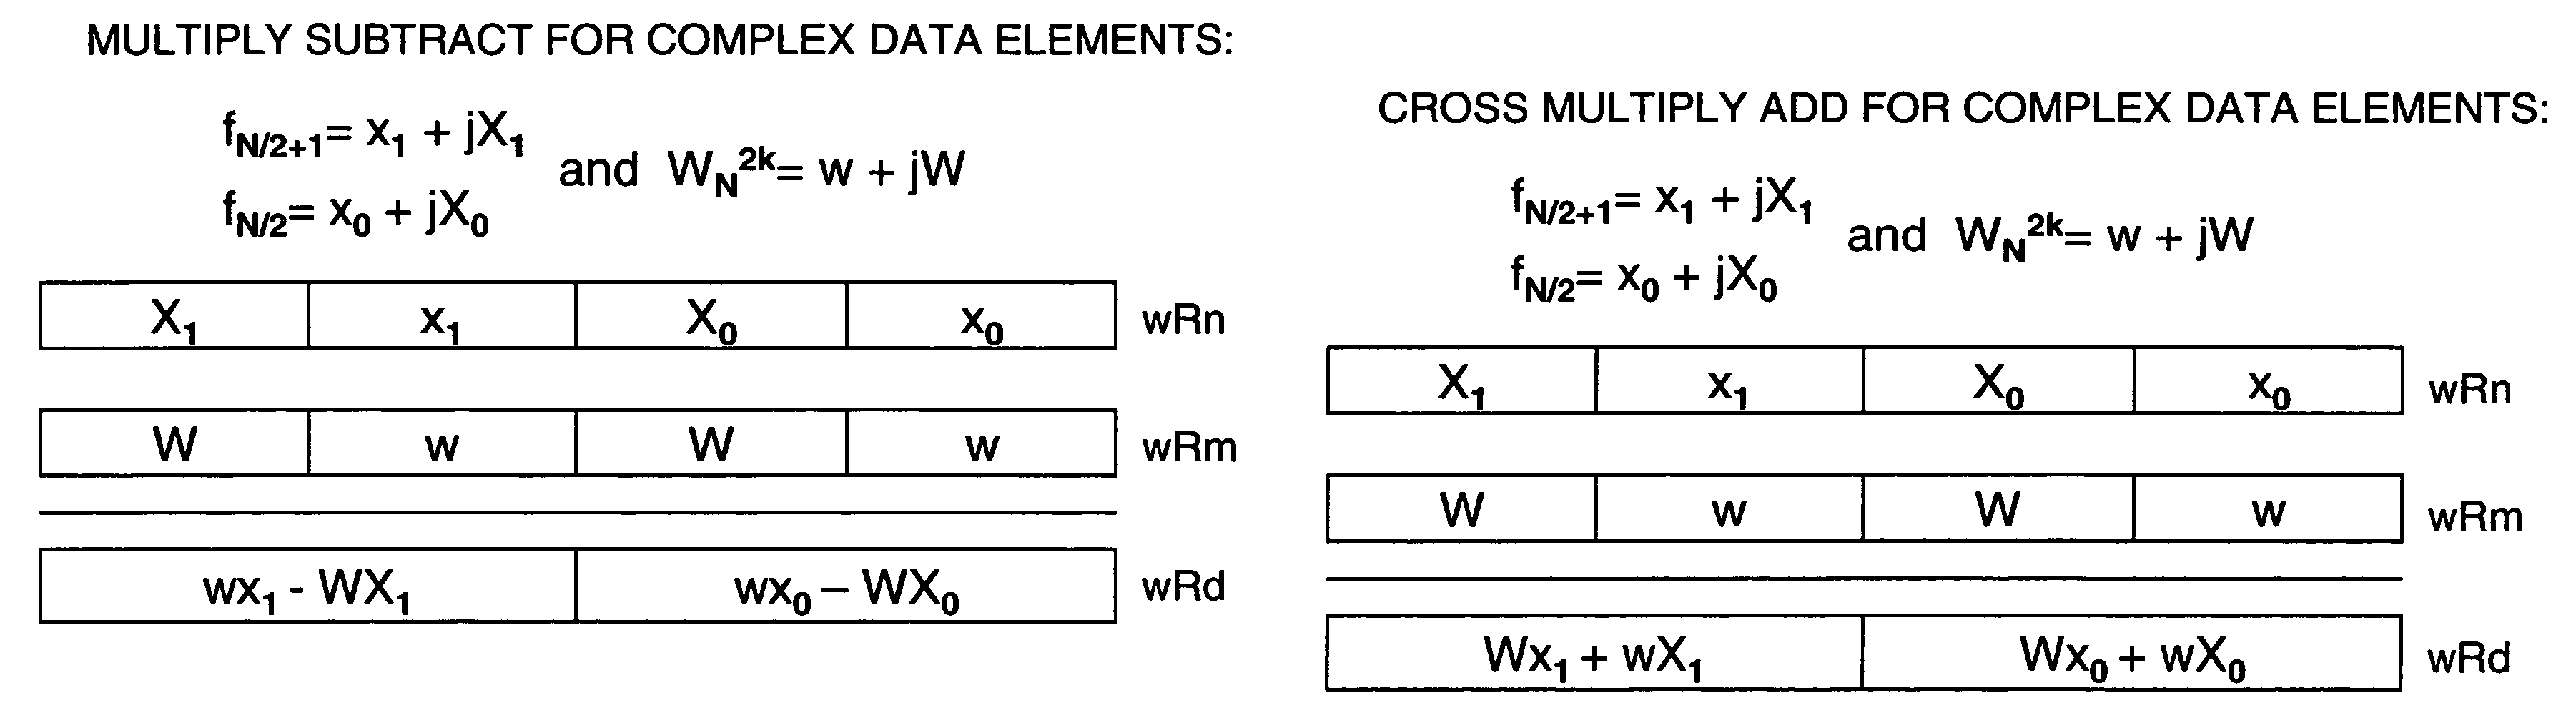 Cross multiply and add instruction and multiply and subtract instruction SIMD execution on real and imaginary components of a plurality of complex data elements